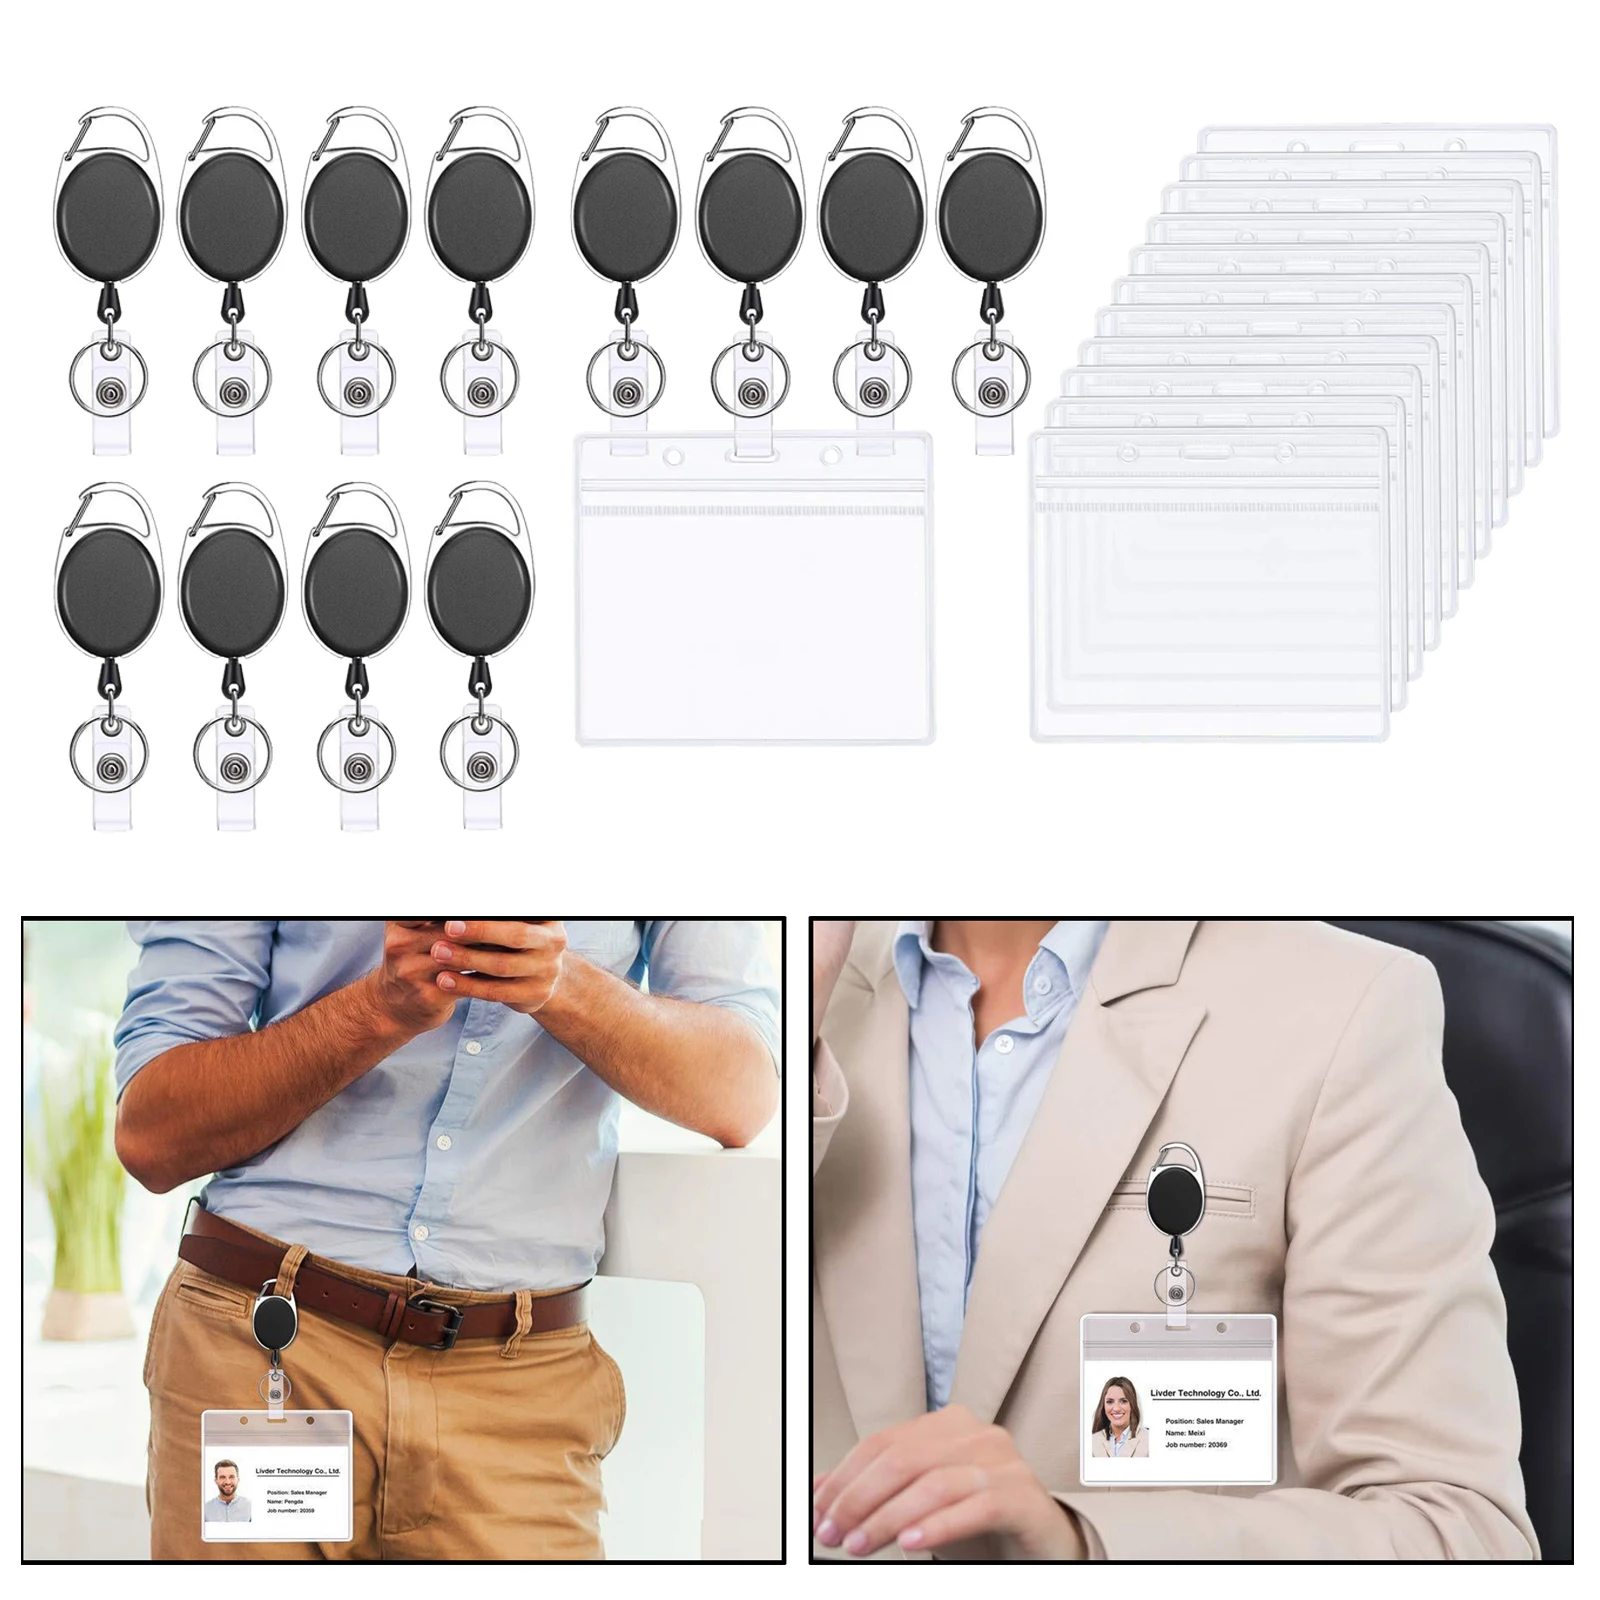 12 PCS Black Retractable Badge Reel w/ Belt Clip Key Ring ID Card Holder Photo Name Tag Holders for School Students Worker